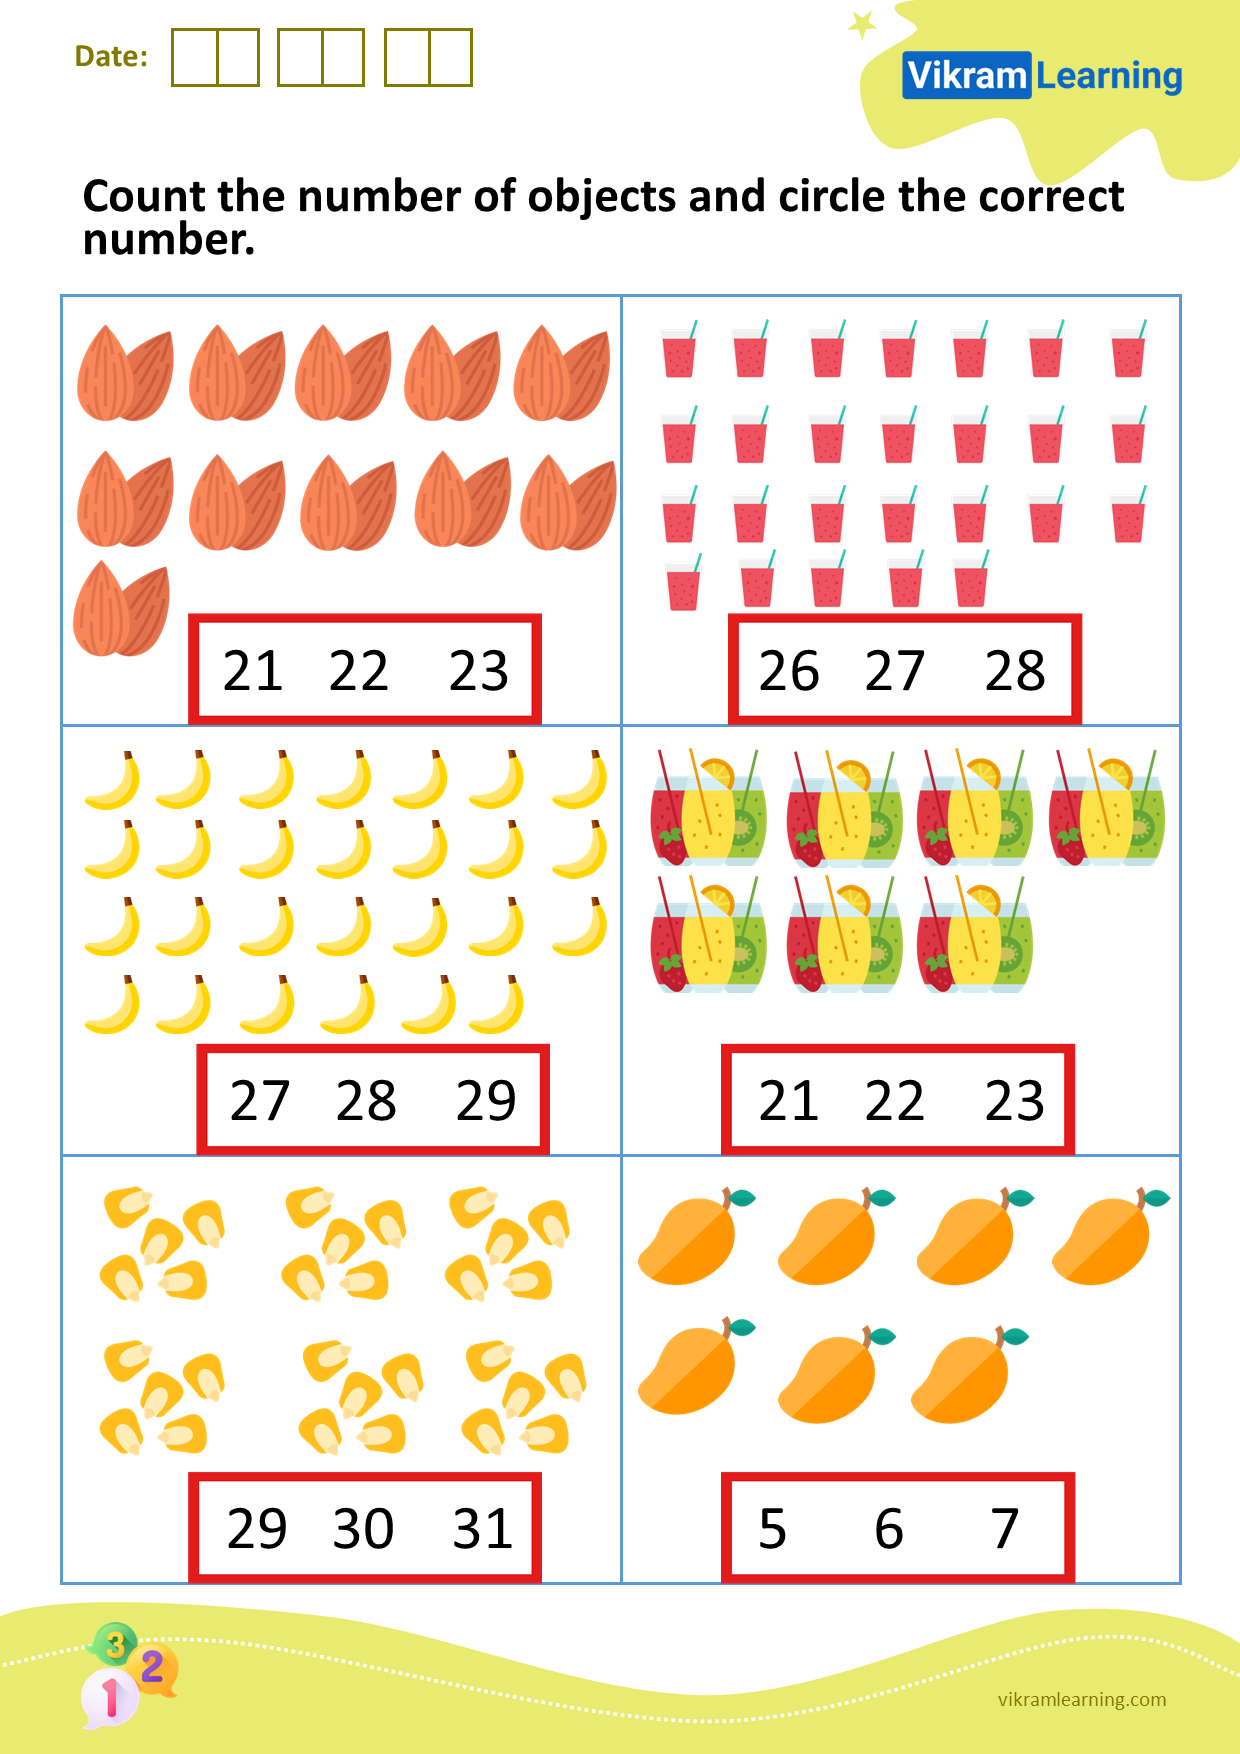 Download count the number of objects and circle the correct number worksheets